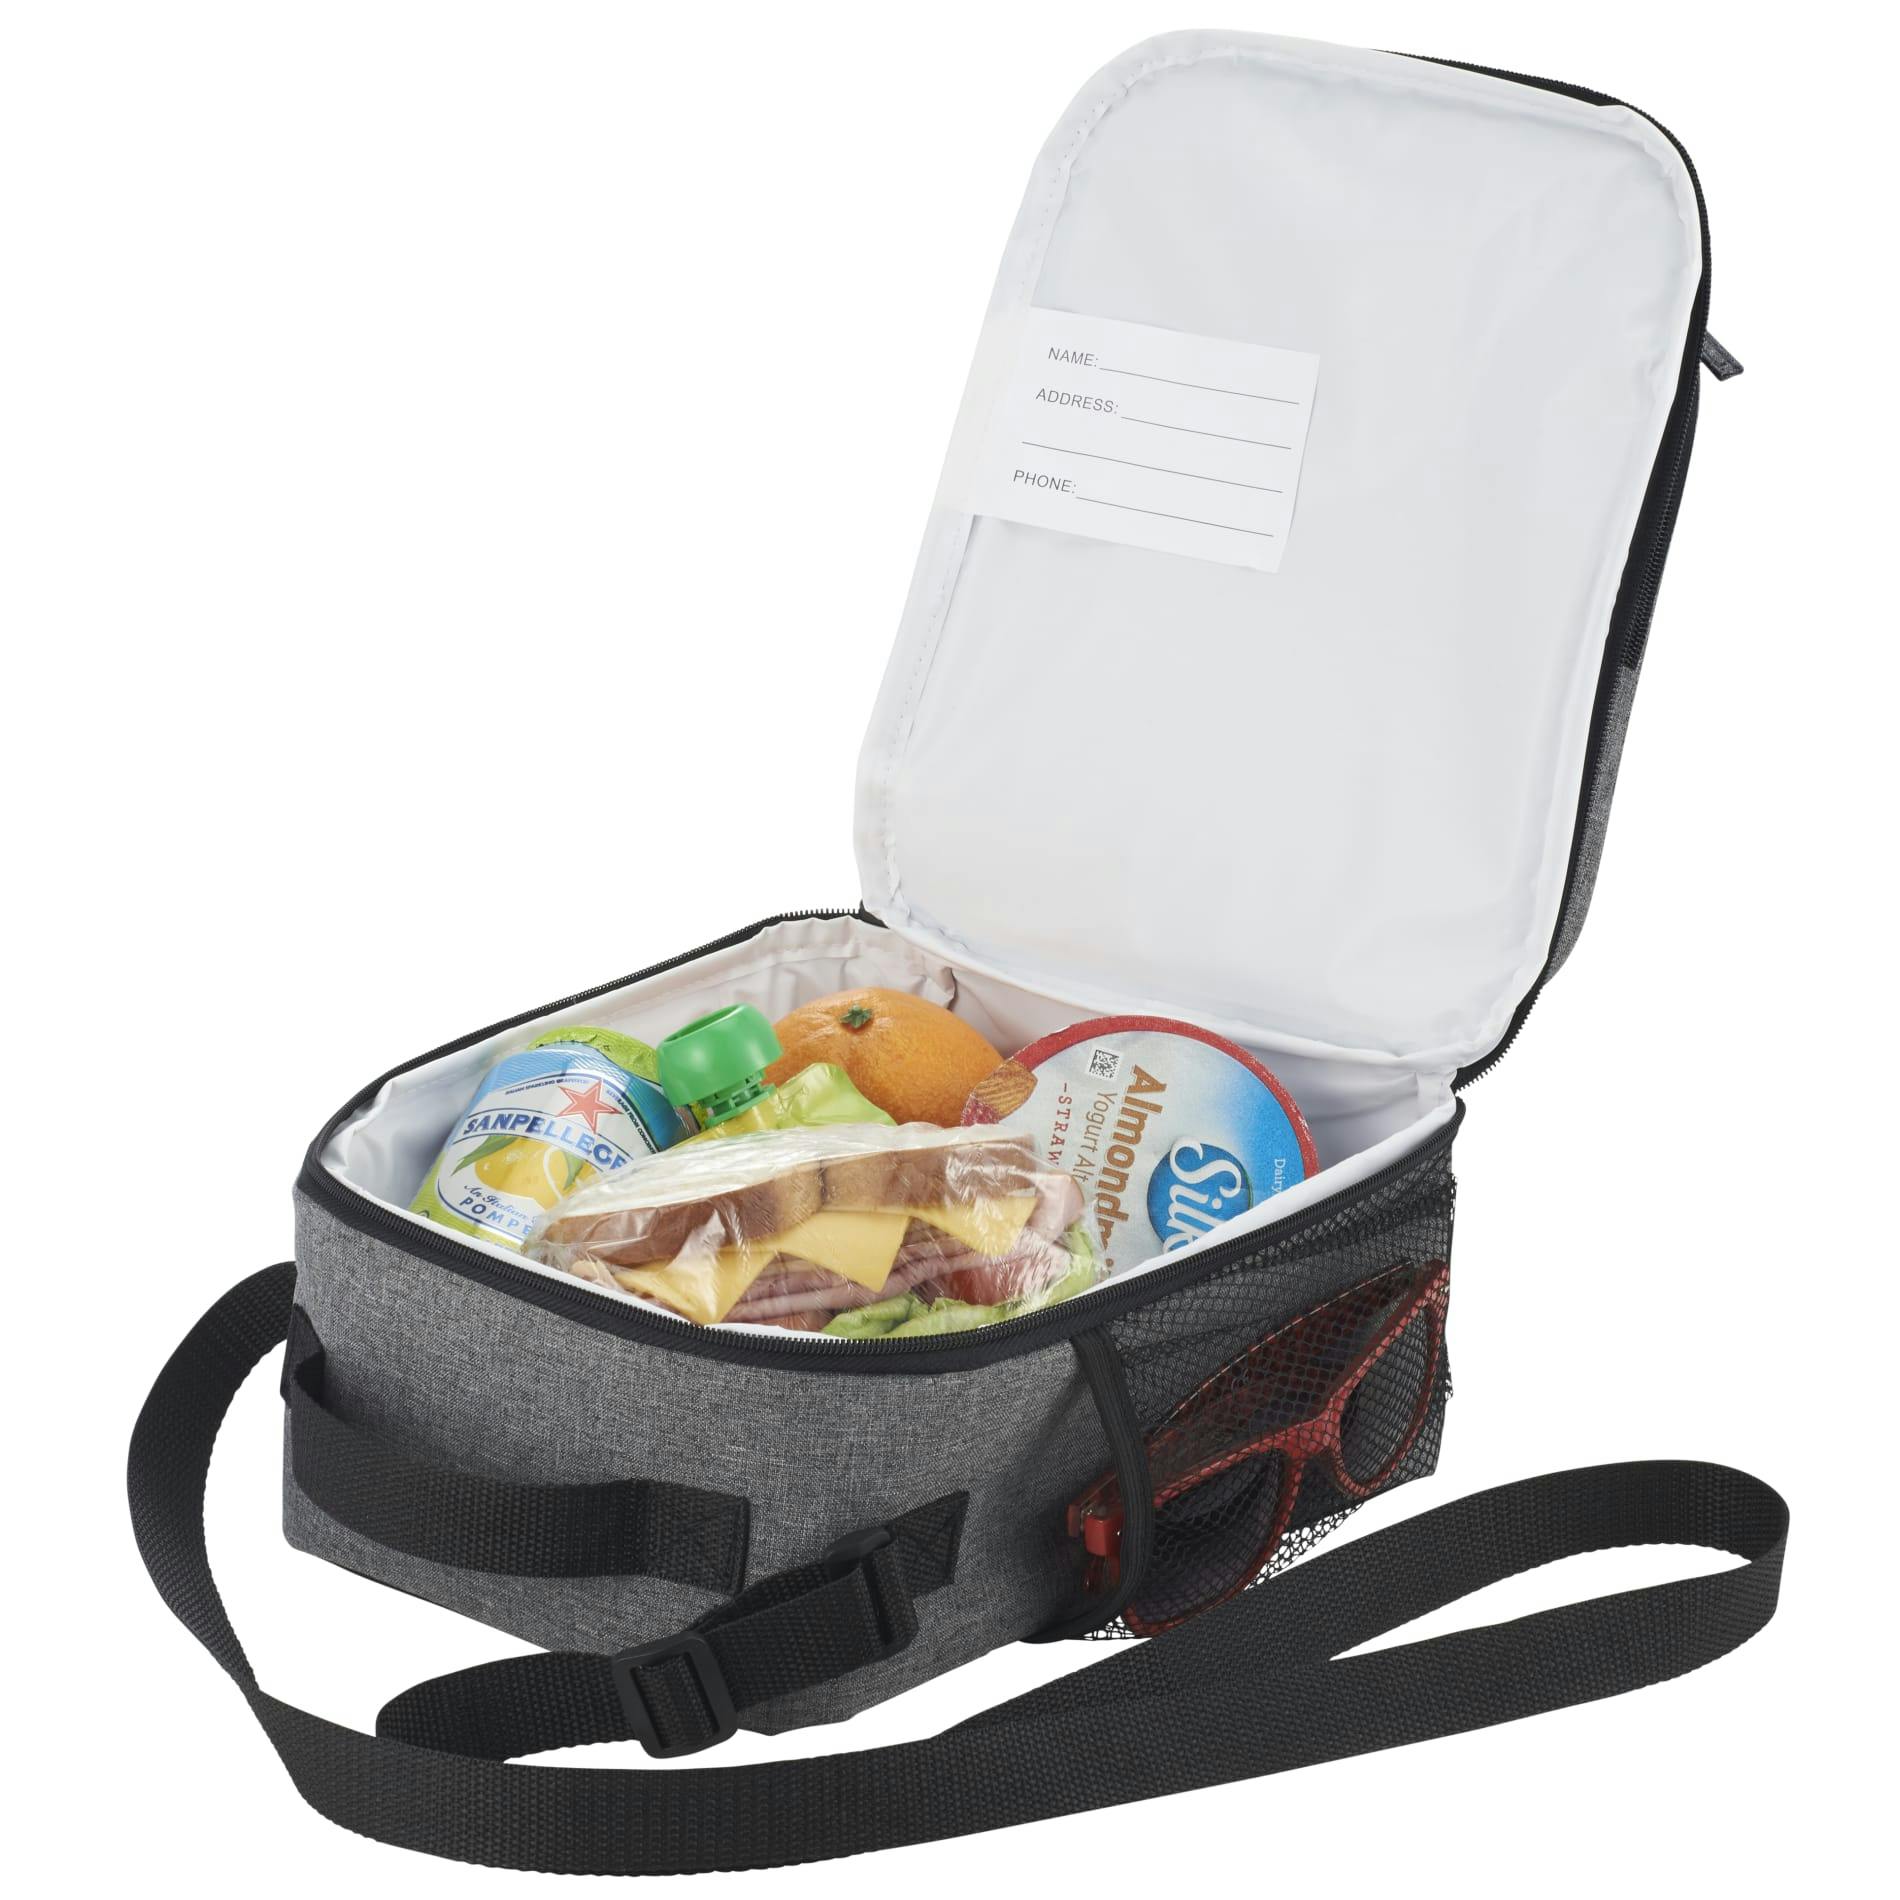 Brandt 6 Can Lunch Cooler - additional Image 1